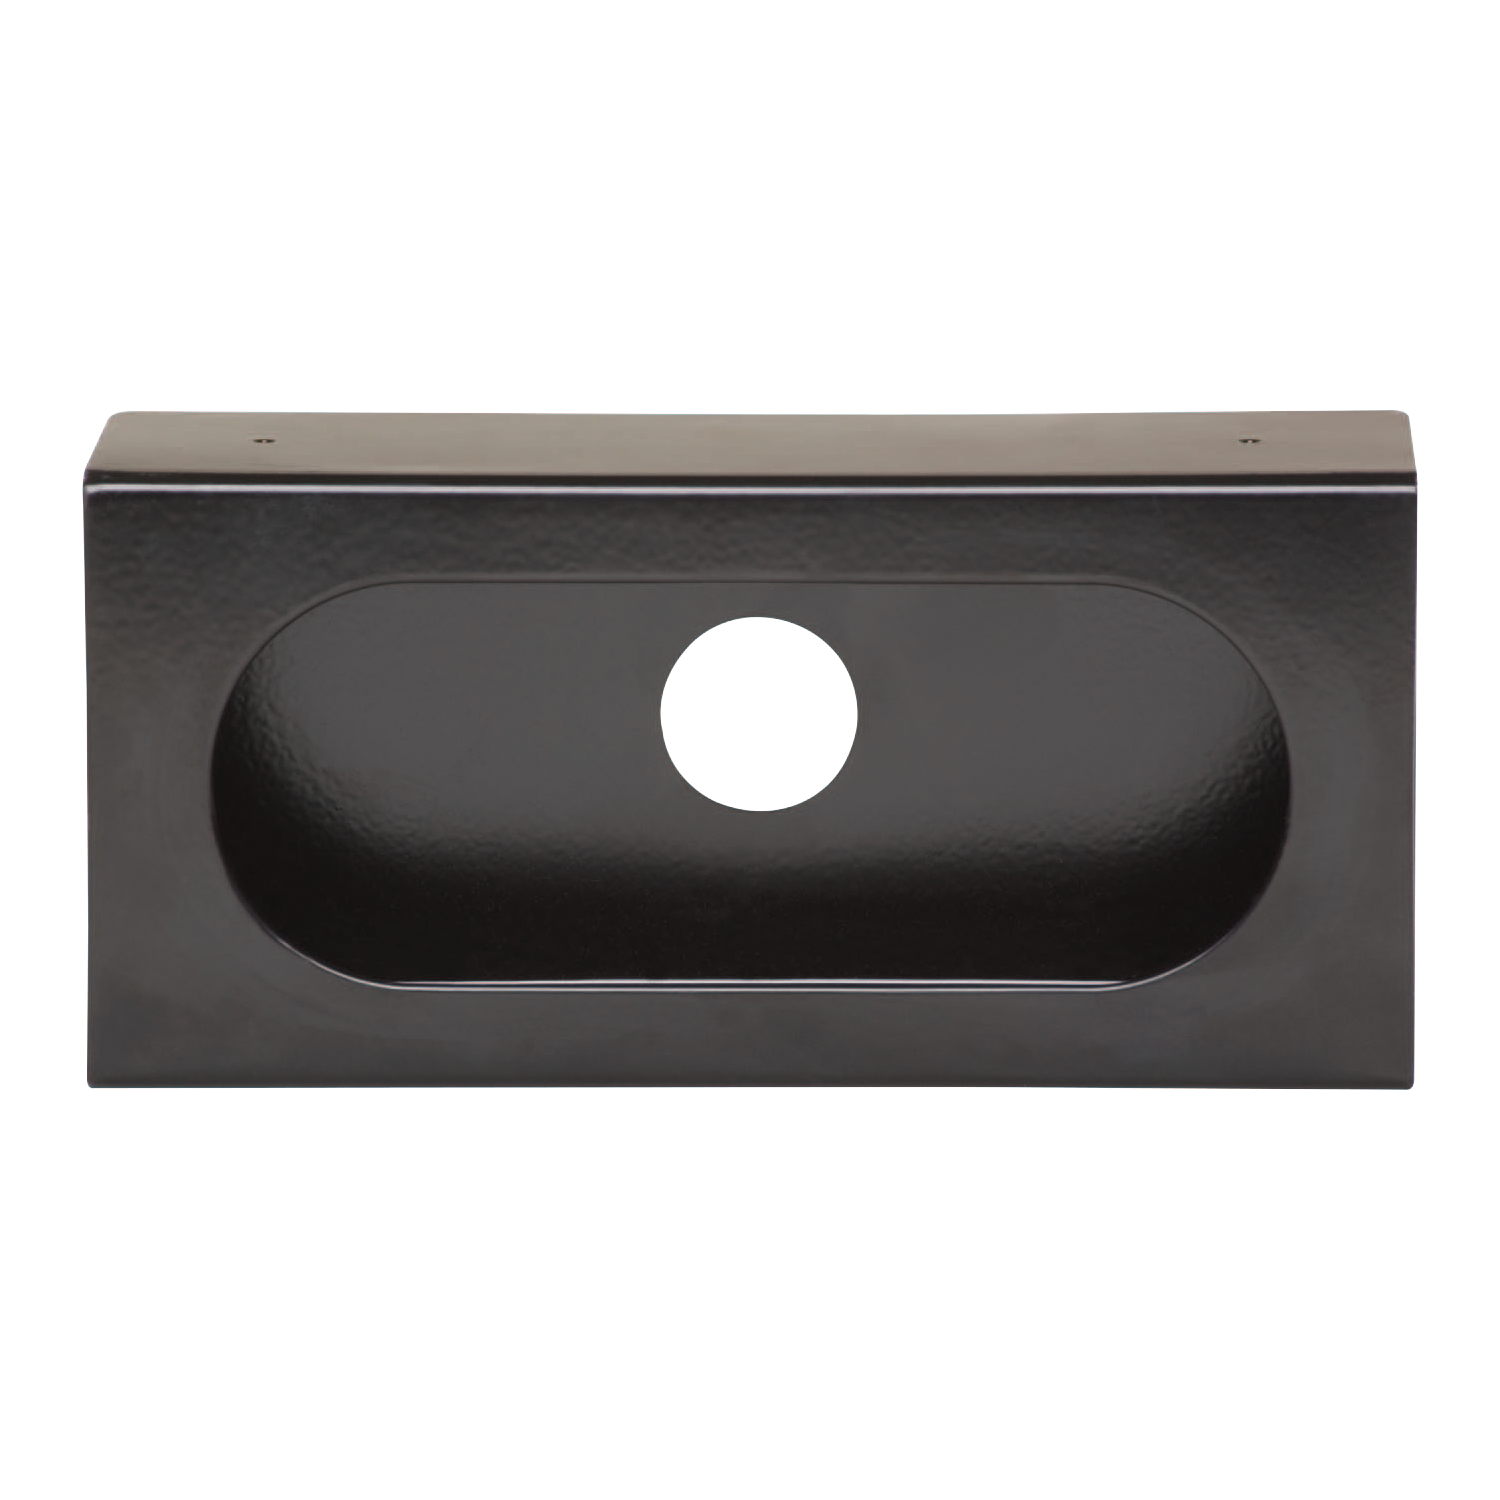 ECO A9895 ECCO Oval Grommet Box for 3860, 3920 & 3965